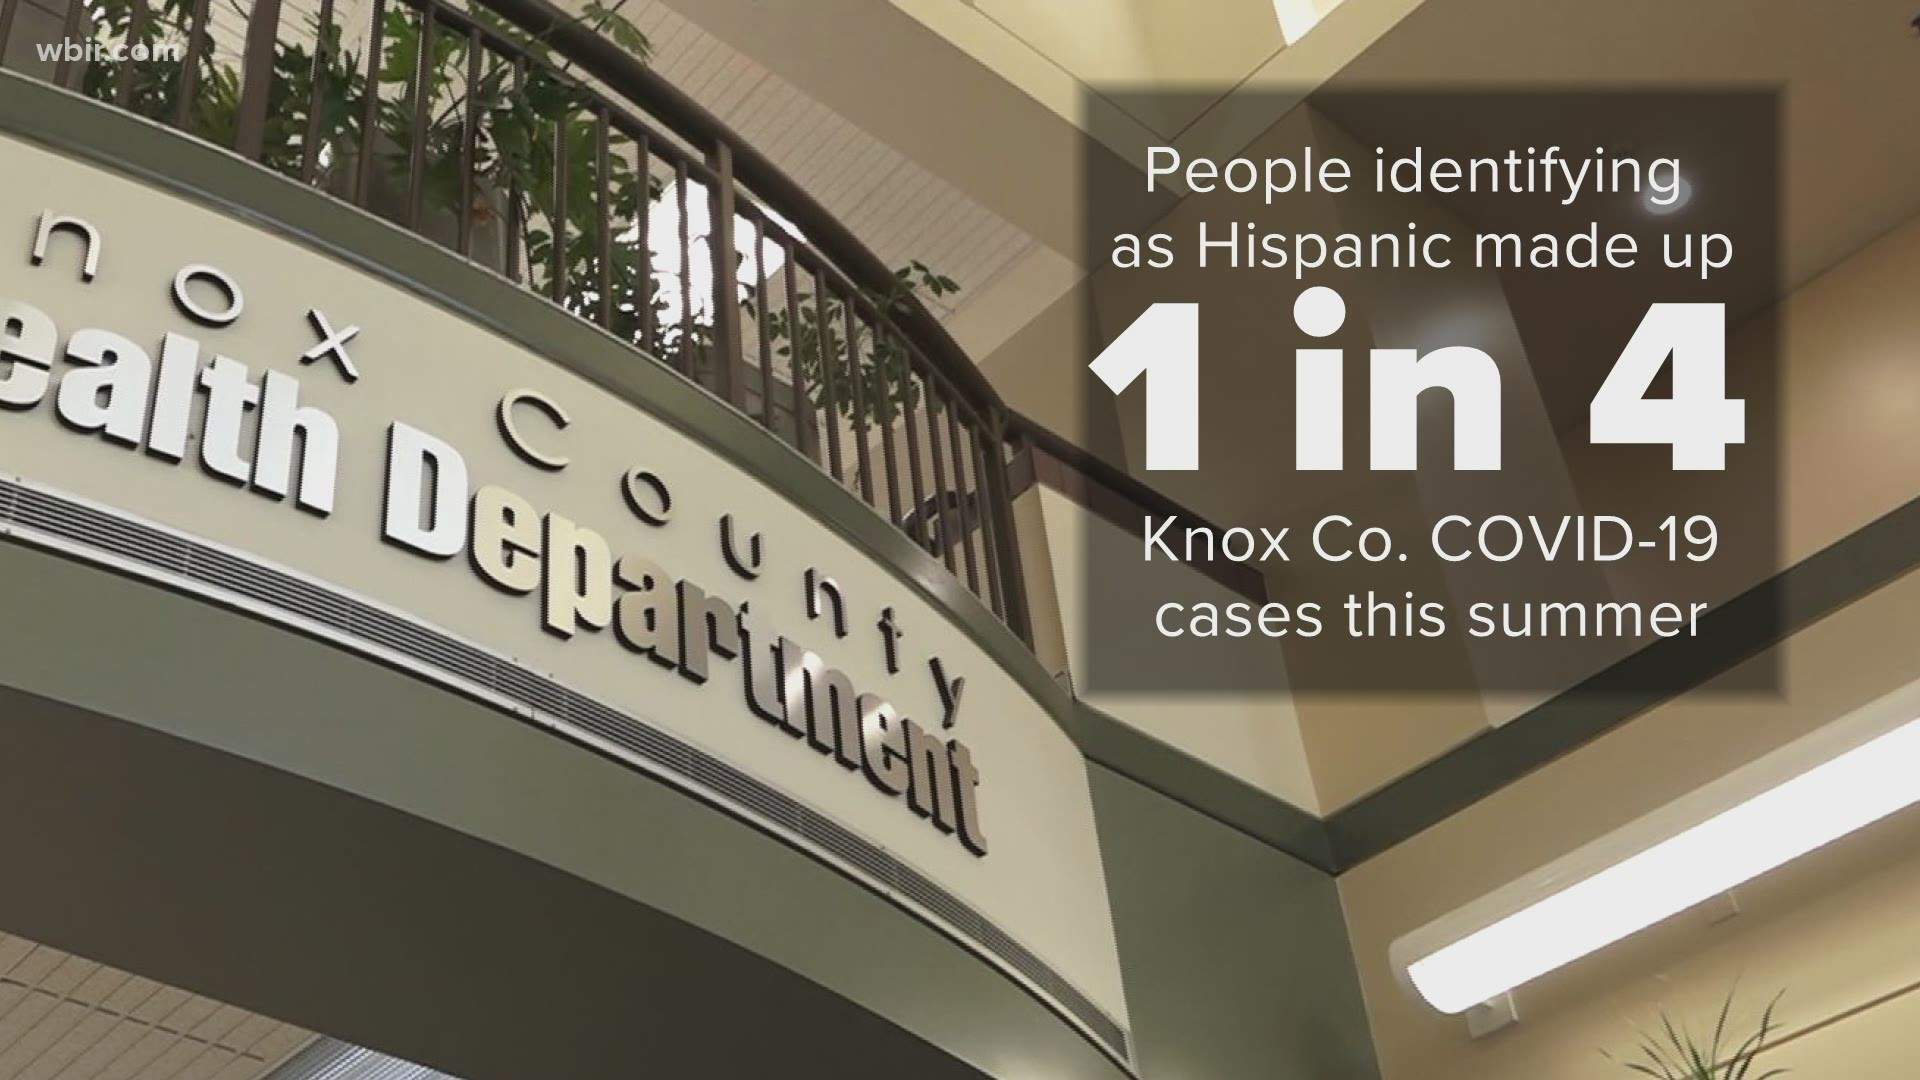 The Knox County Health Department has been trying to connect better with Spanish-speaking communities, during the COVID-19 pandemic.